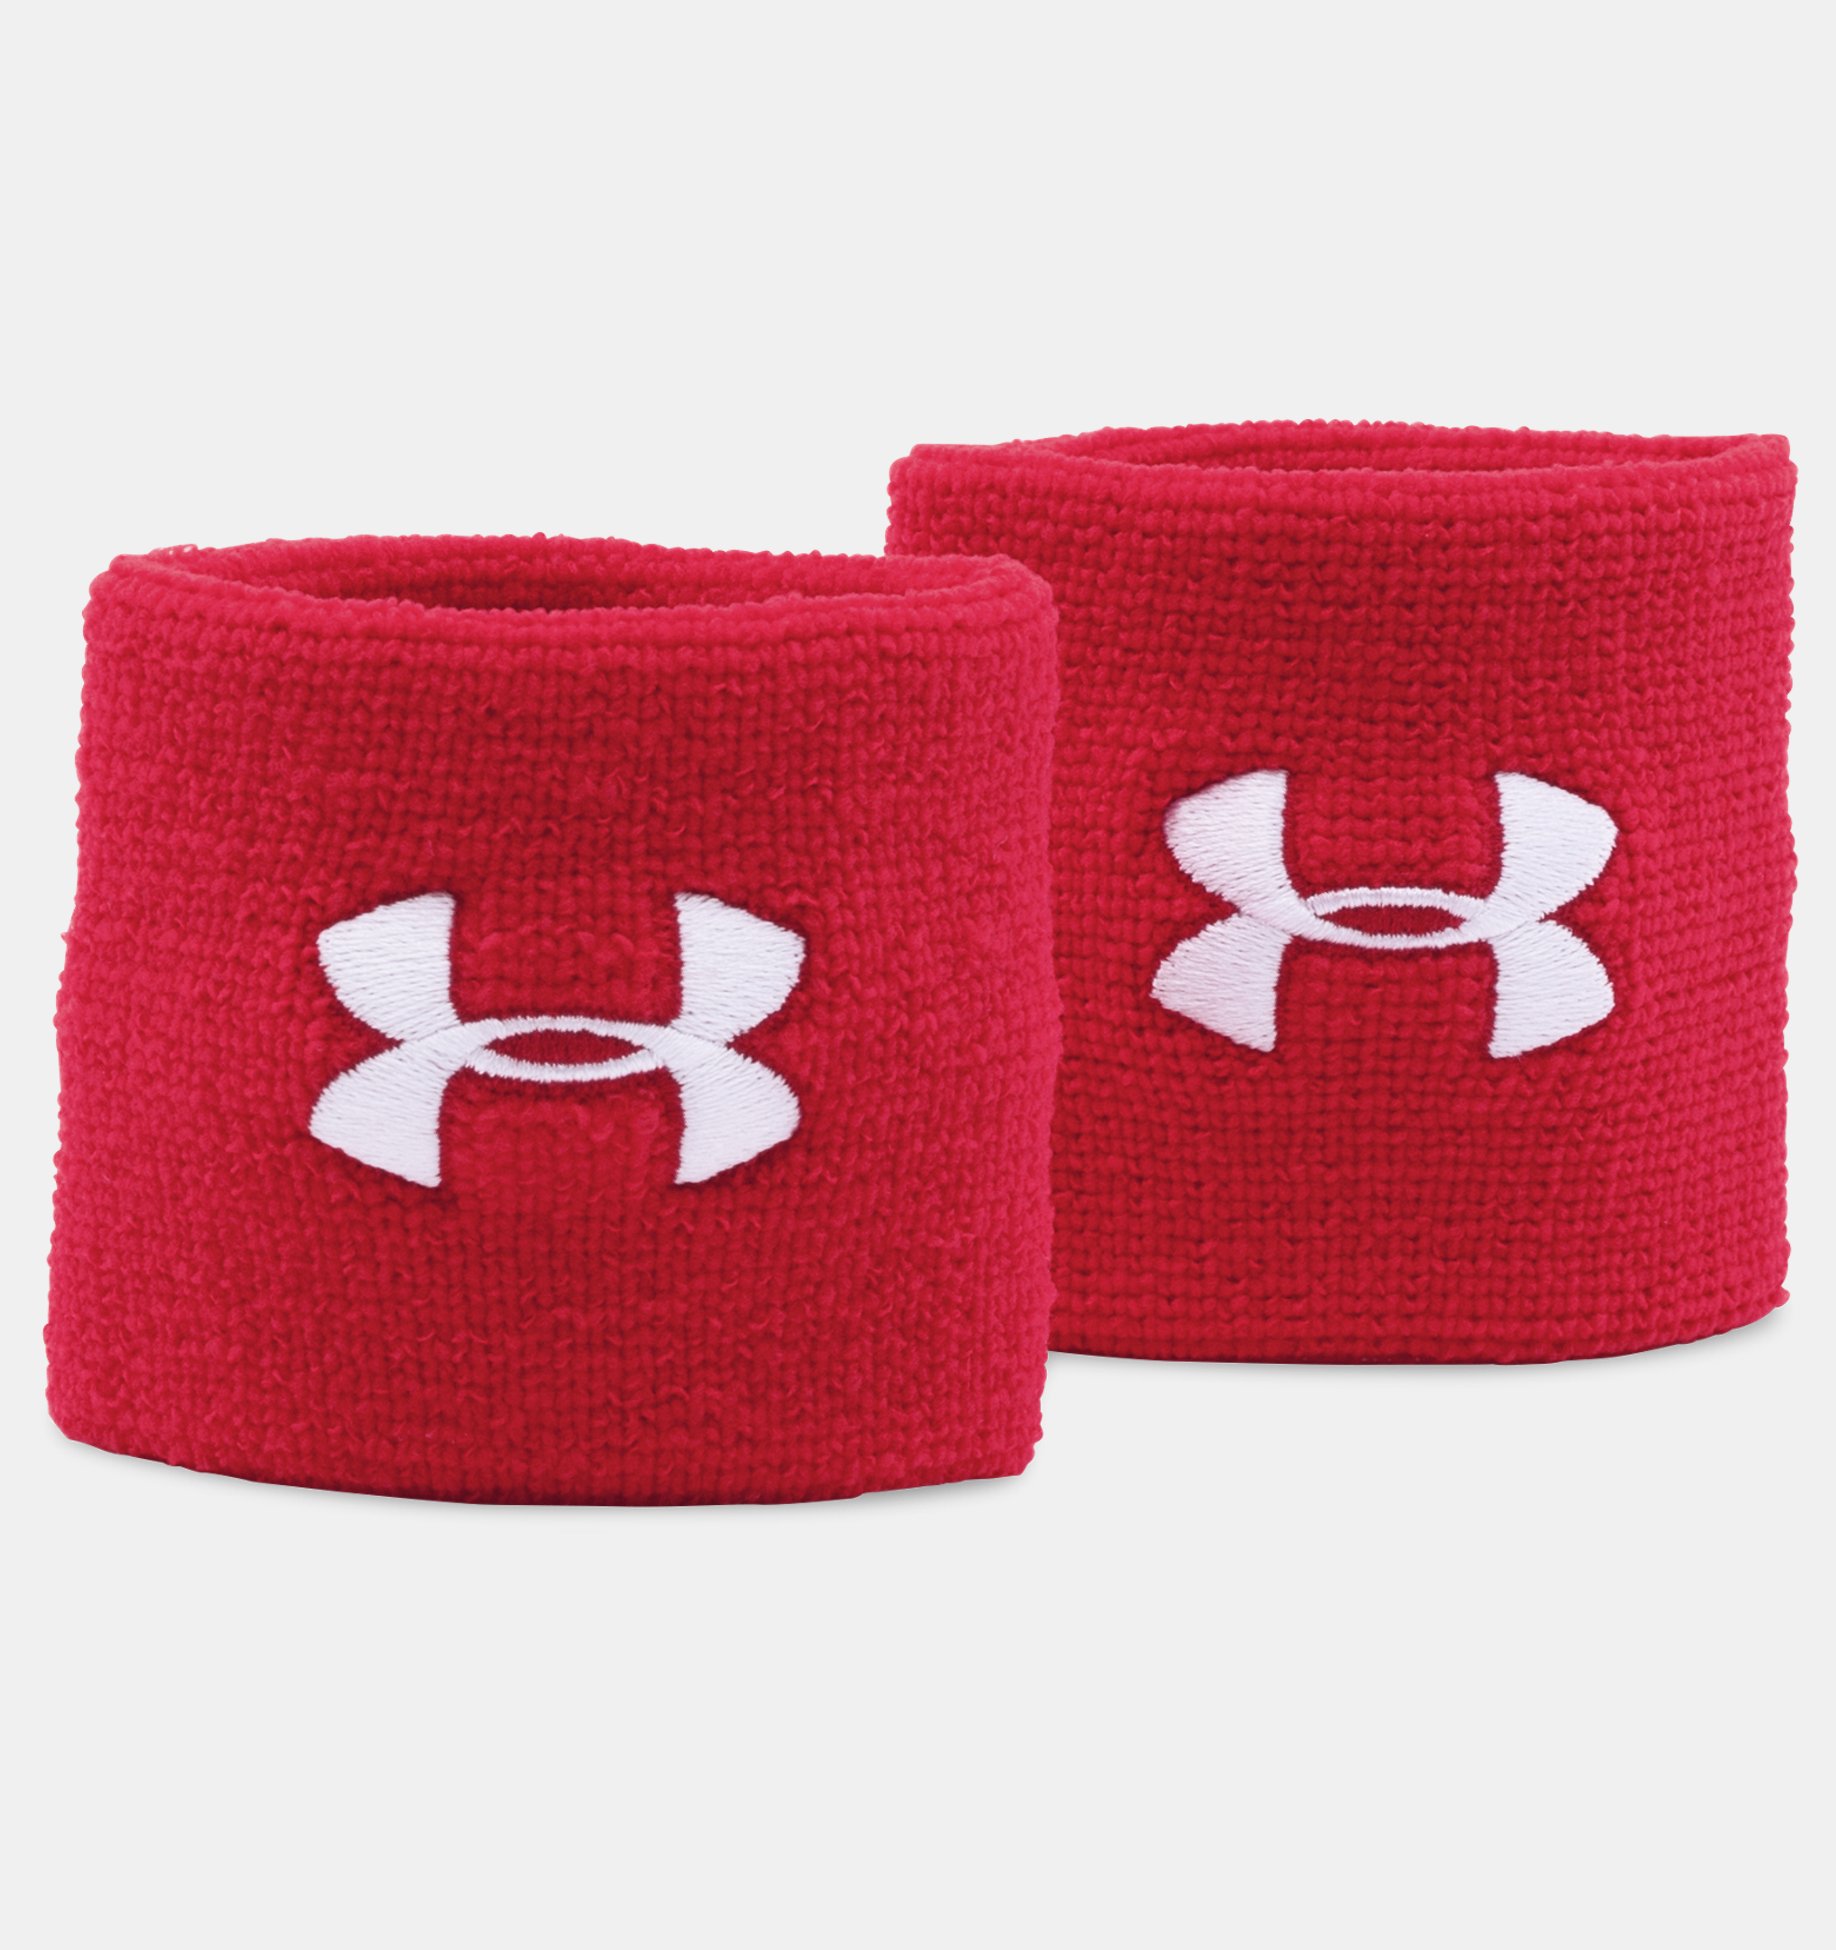 UNDER ARMOUR Performance Wristband,Wrist Compression,Wrist Support,Protection 